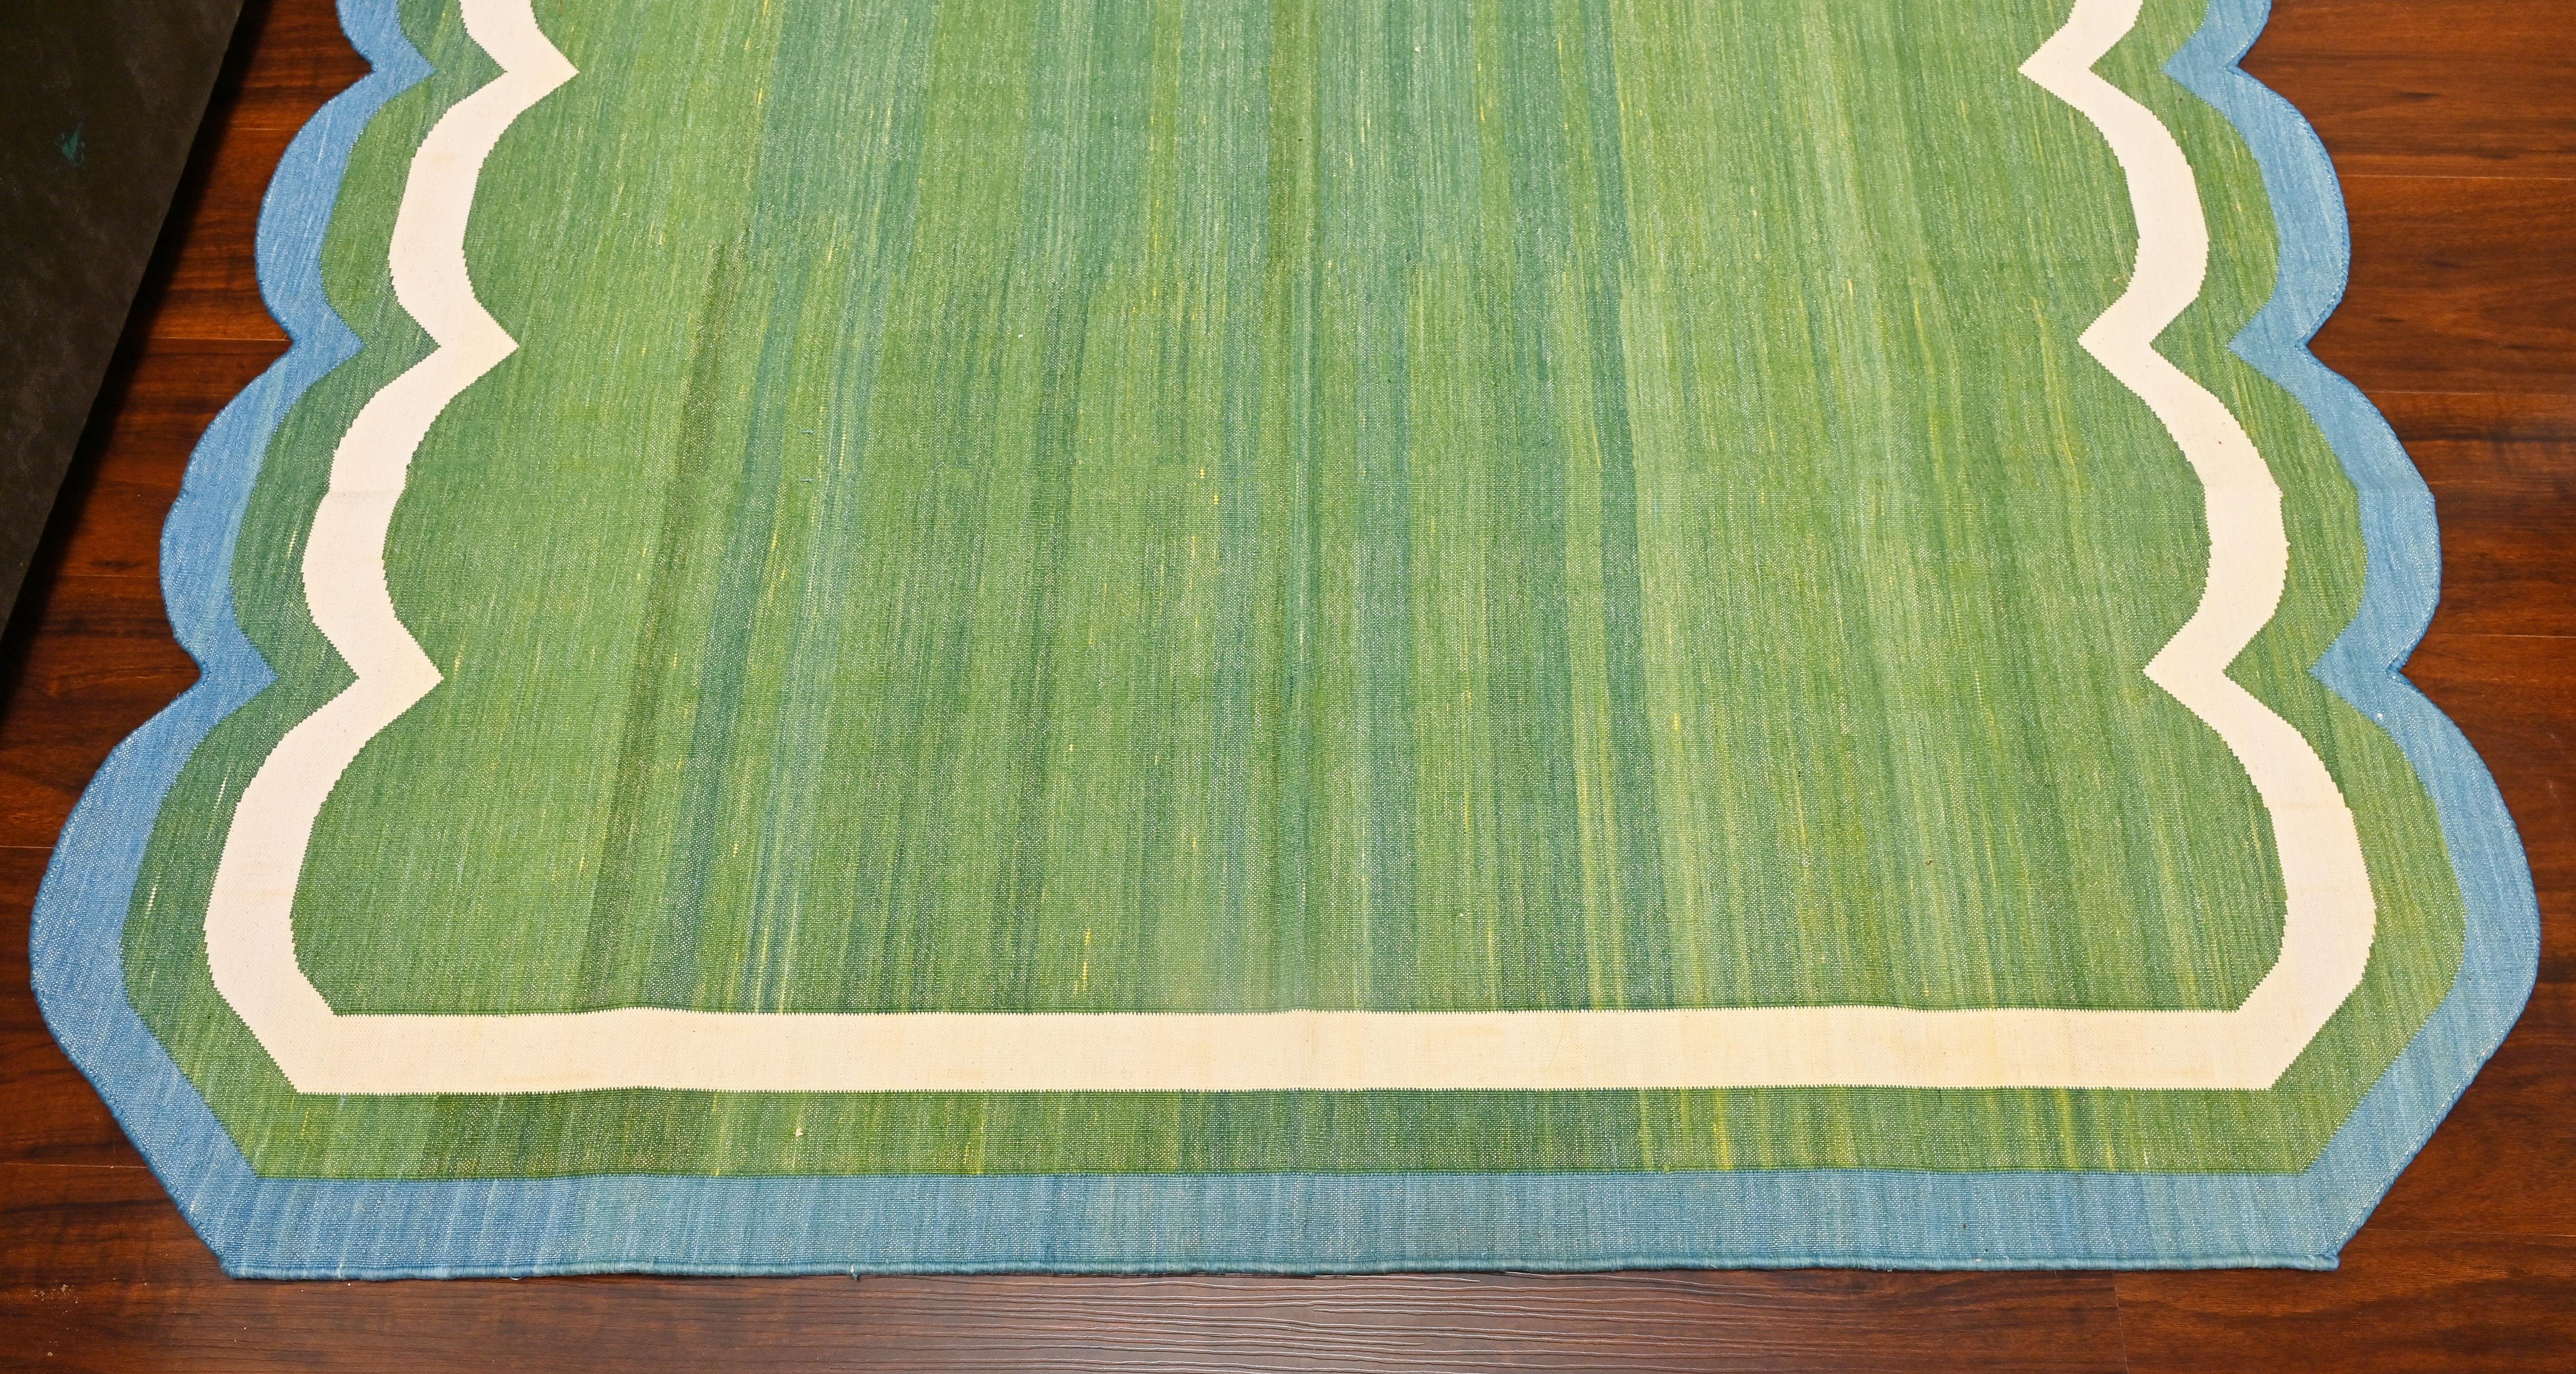 Handmade Cotton Area Flat Weave Rug, 6x9 Green And Blue Scalloped Kilim Dhurrie For Sale 2